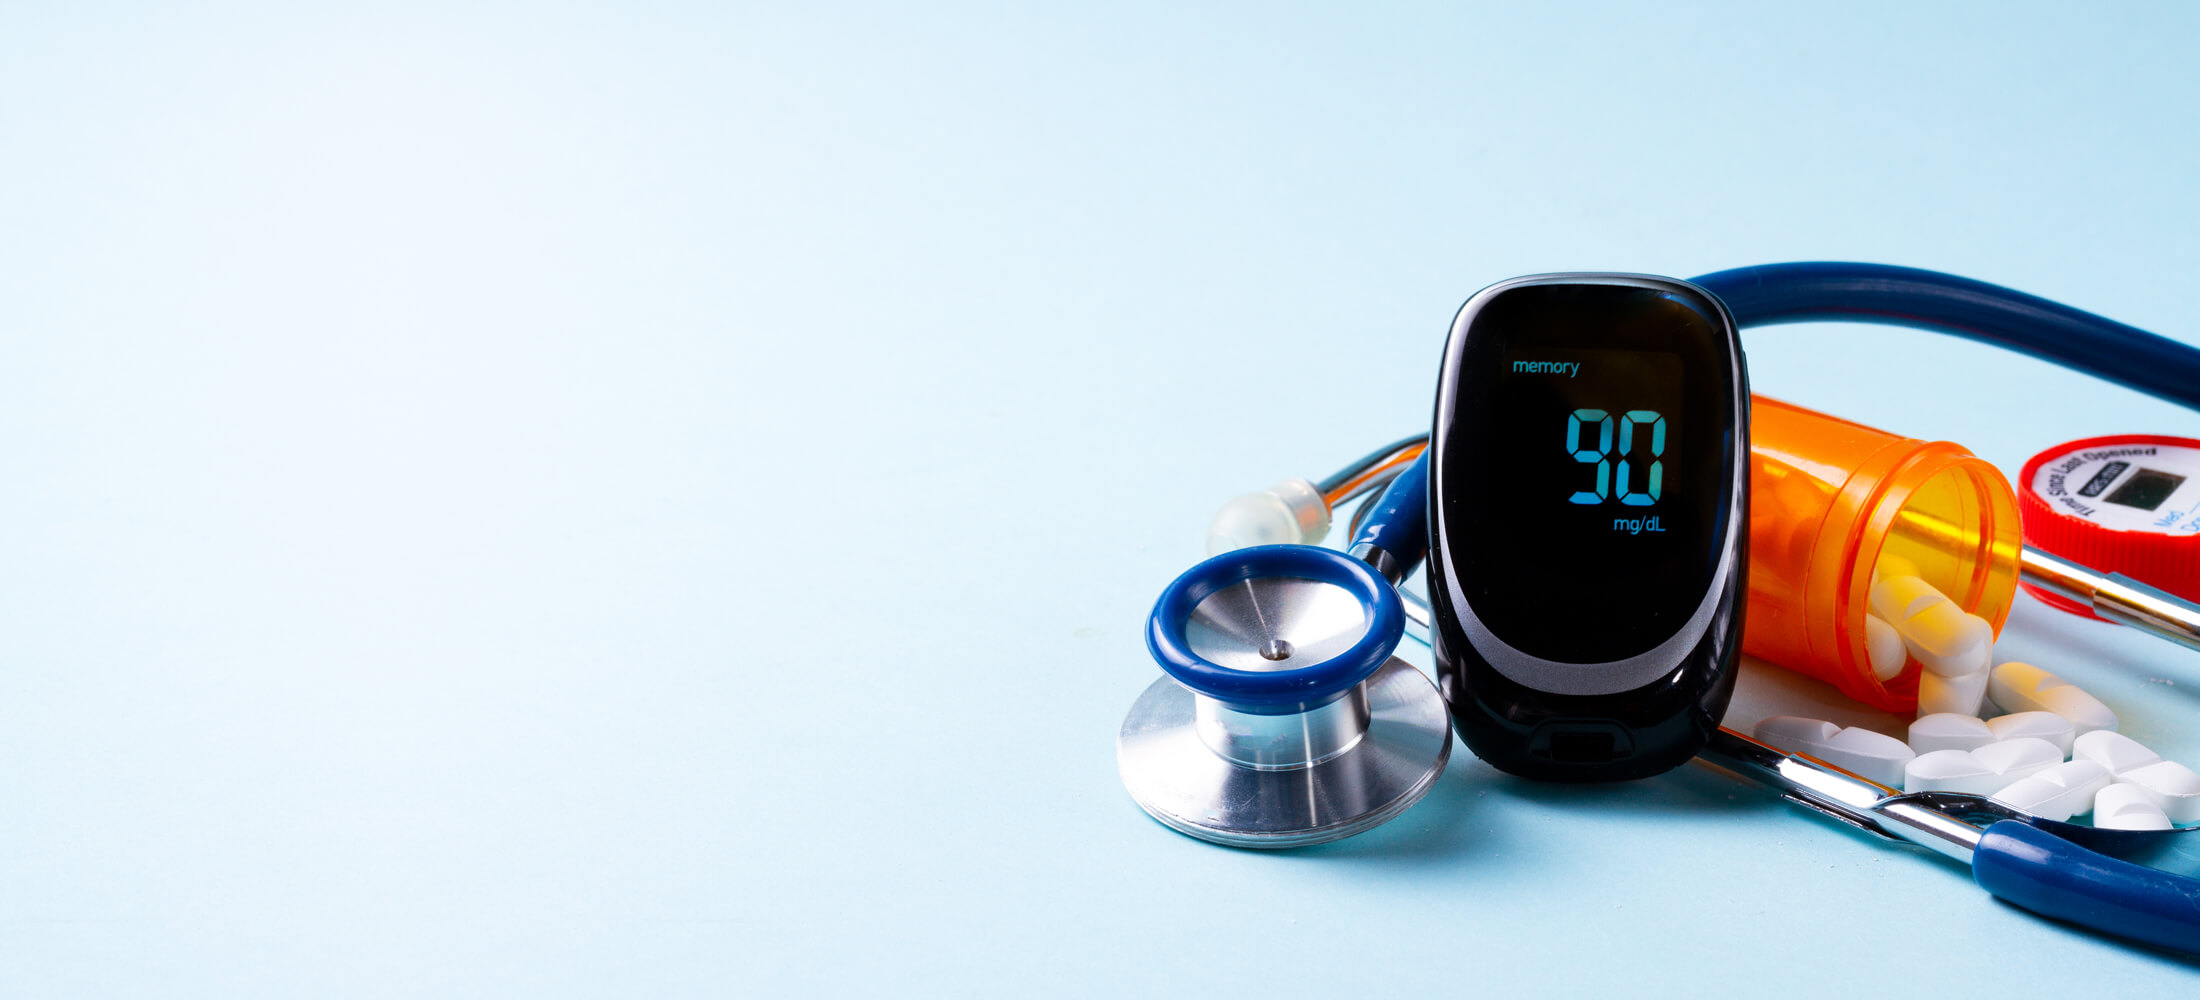 stethoscope and glucose reader